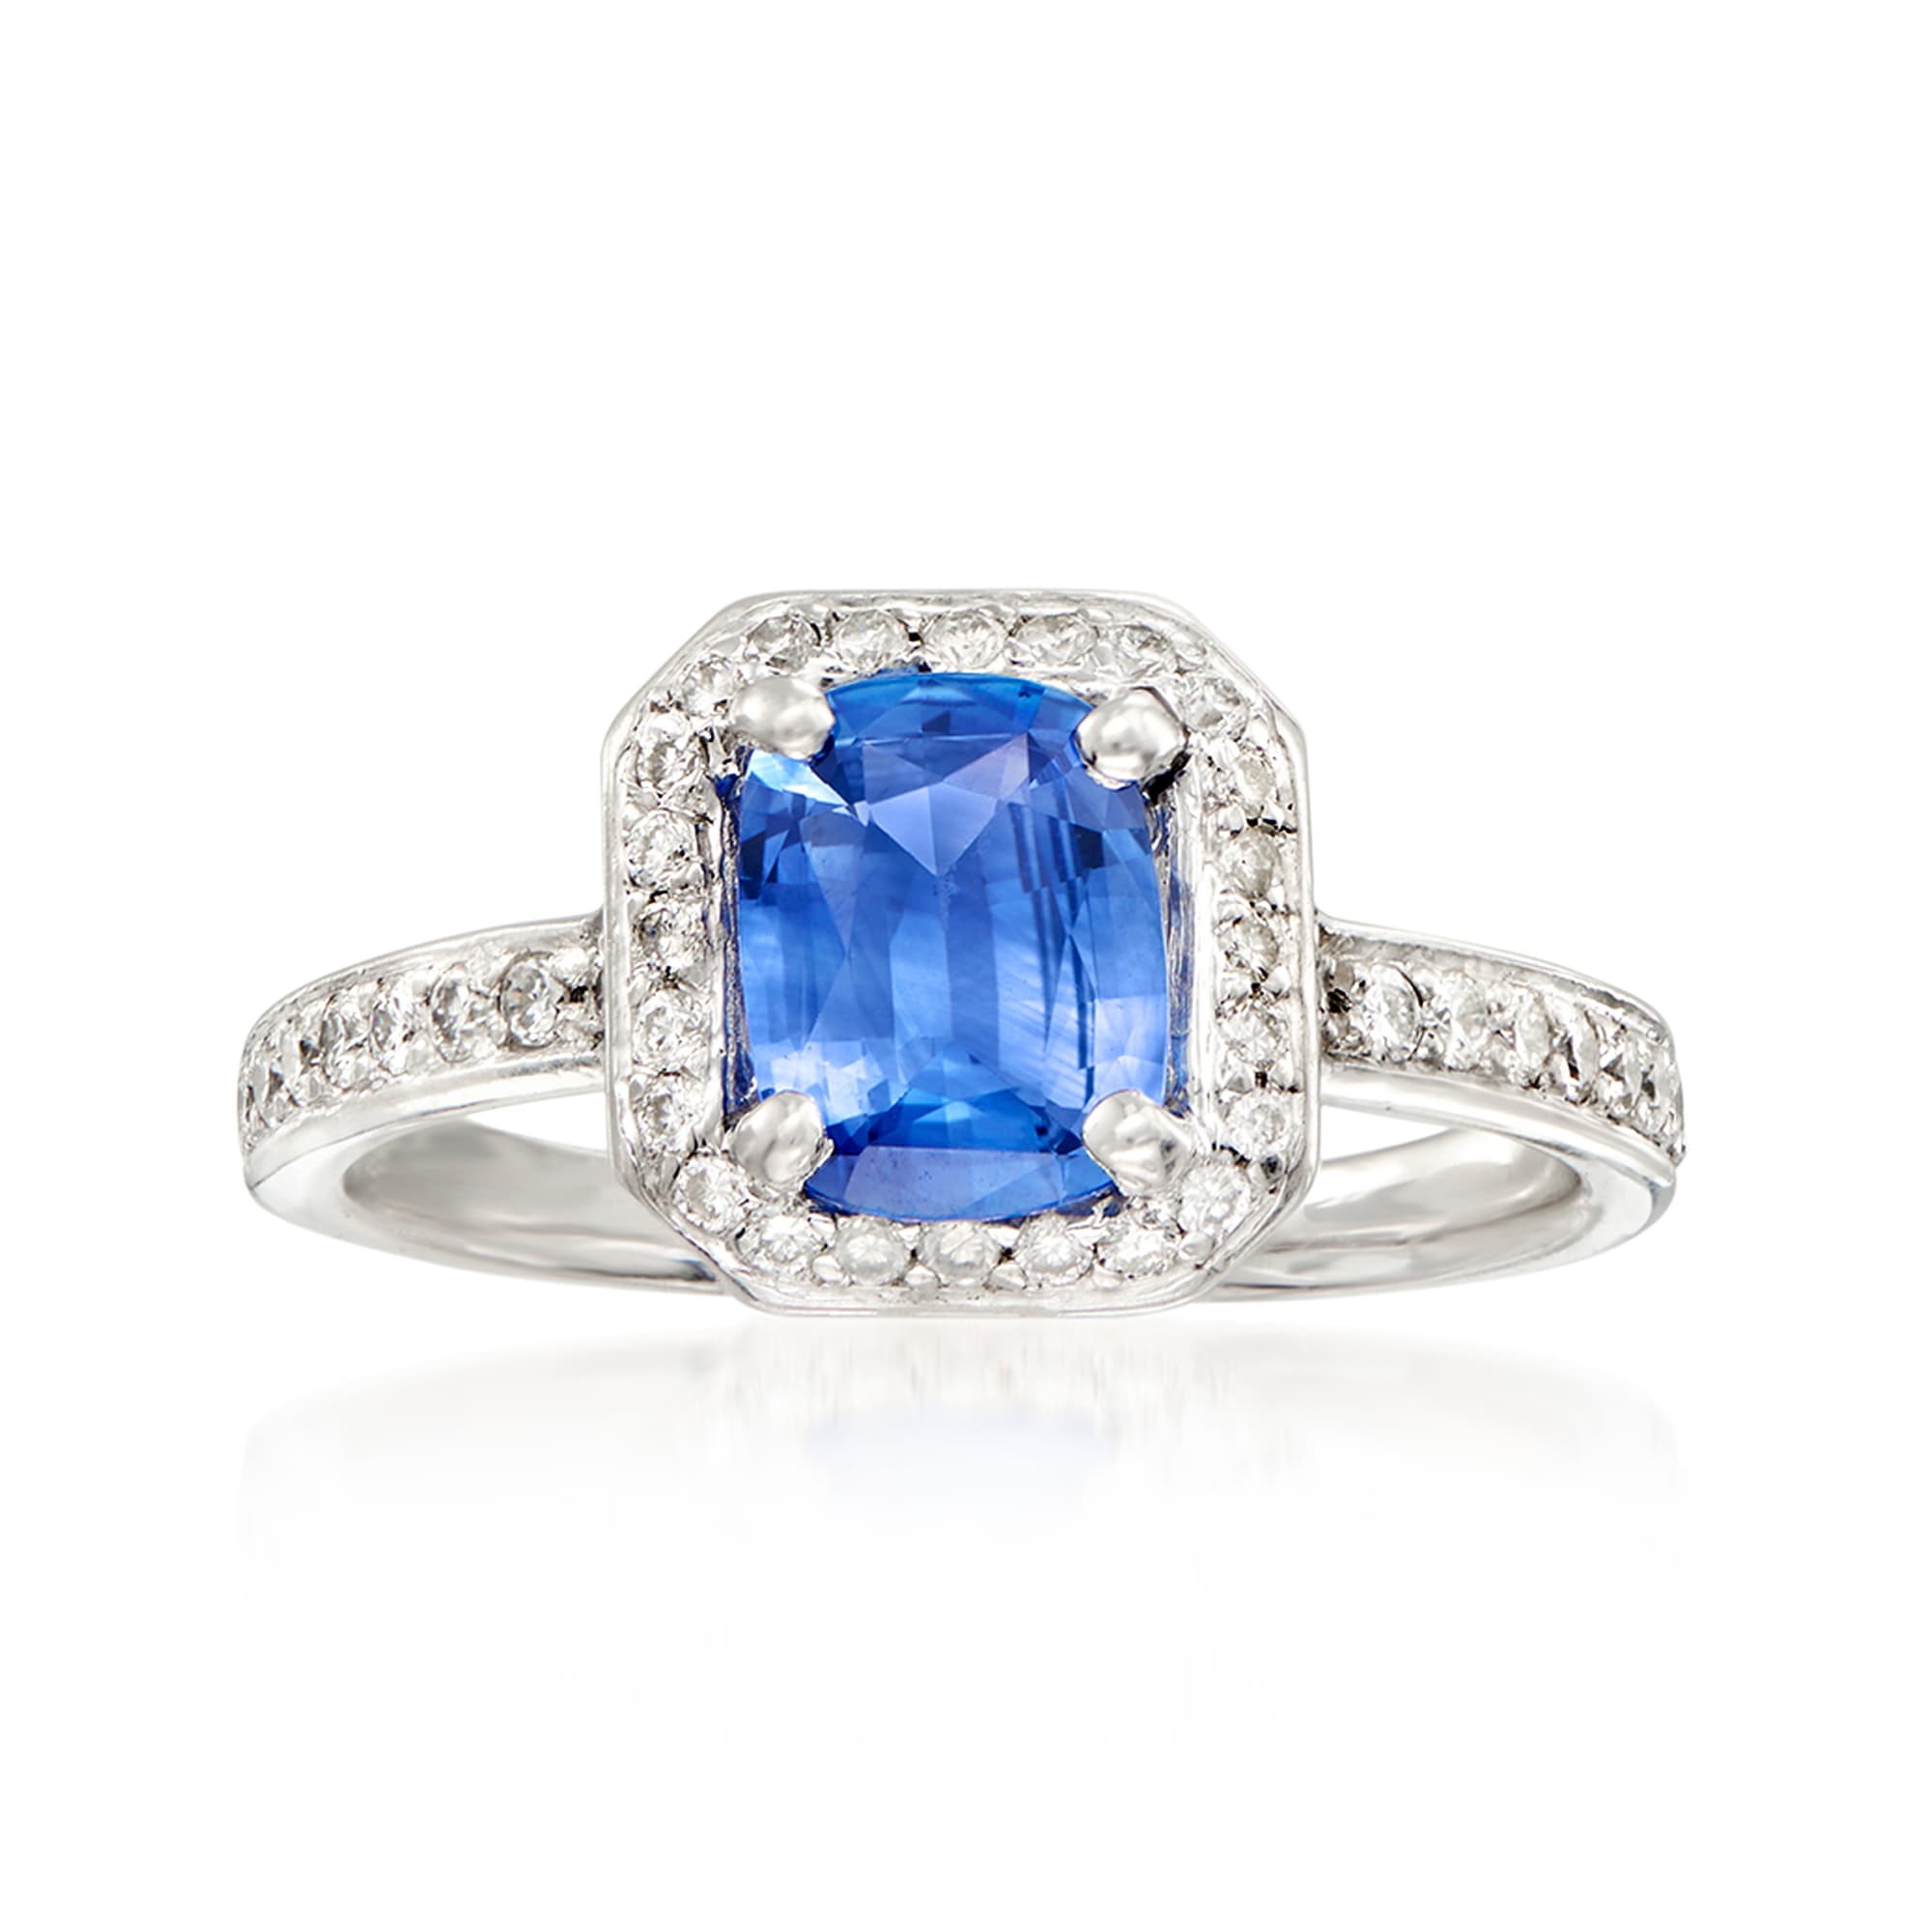 C. 1990 Vintage 1.05 Carat Sapphire Ring with .55 ct. t.w. Diamonds in ...